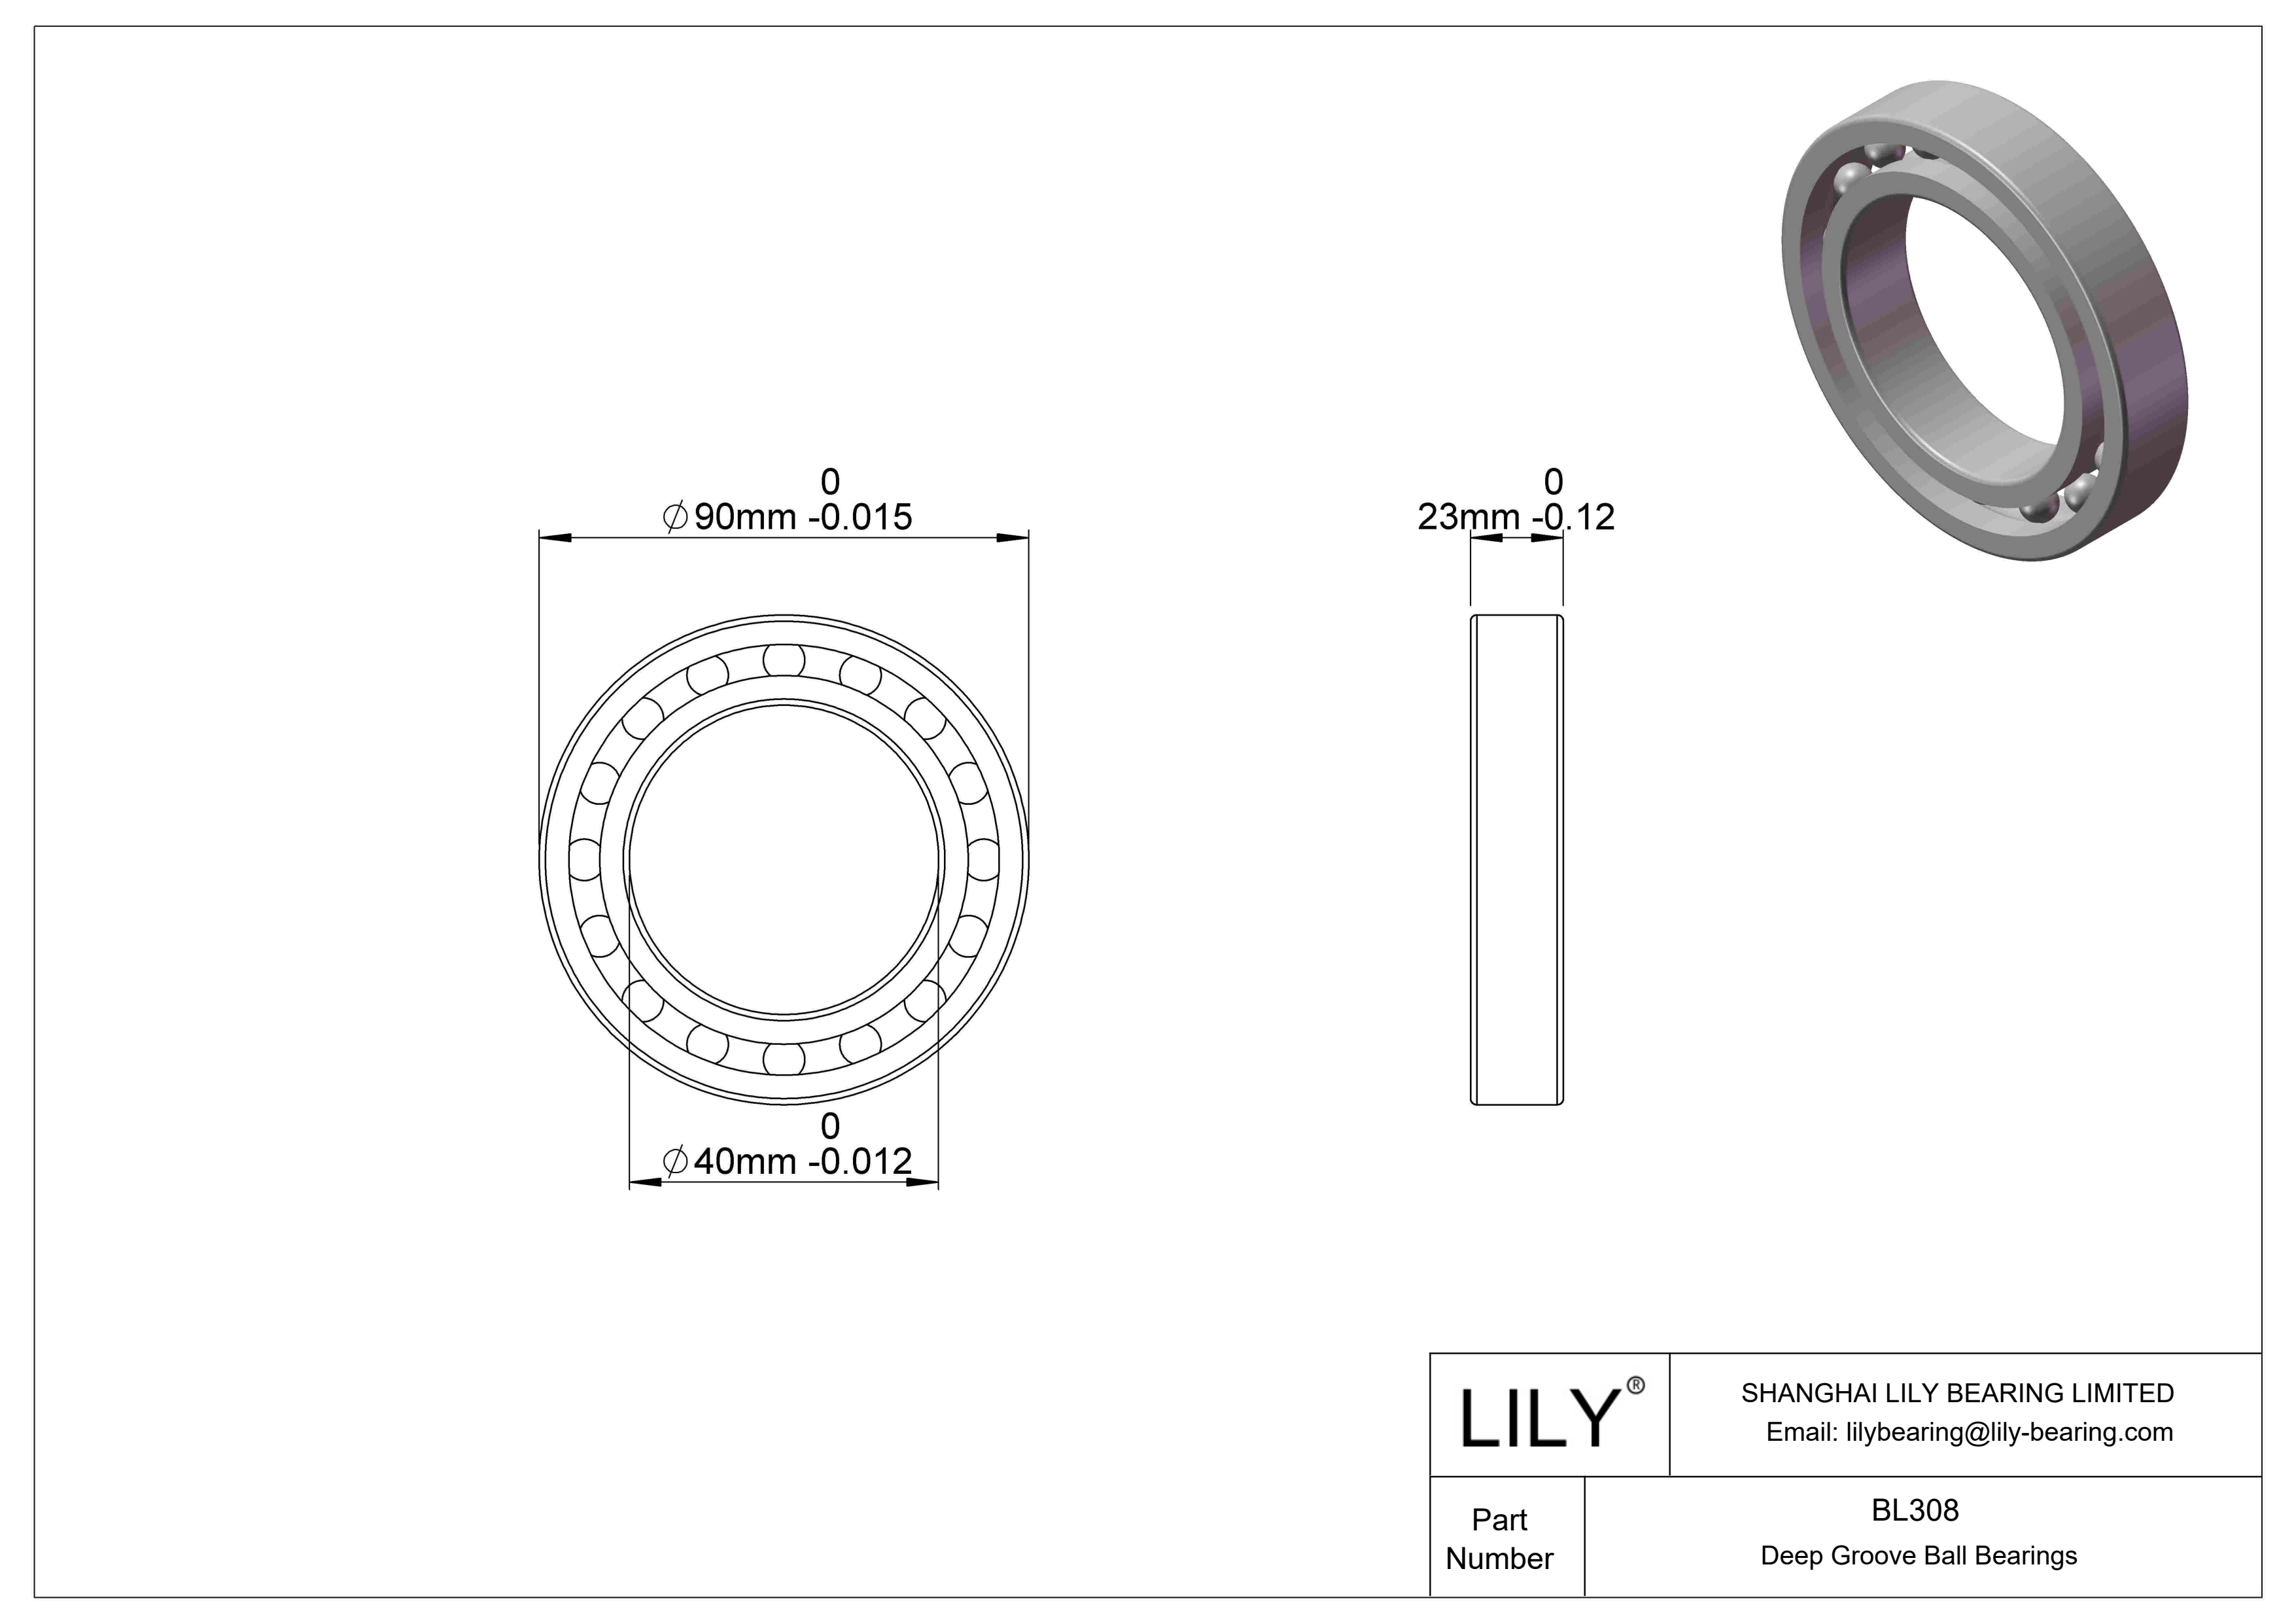 BL308 General Deep Groove Ball Bearing cad drawing